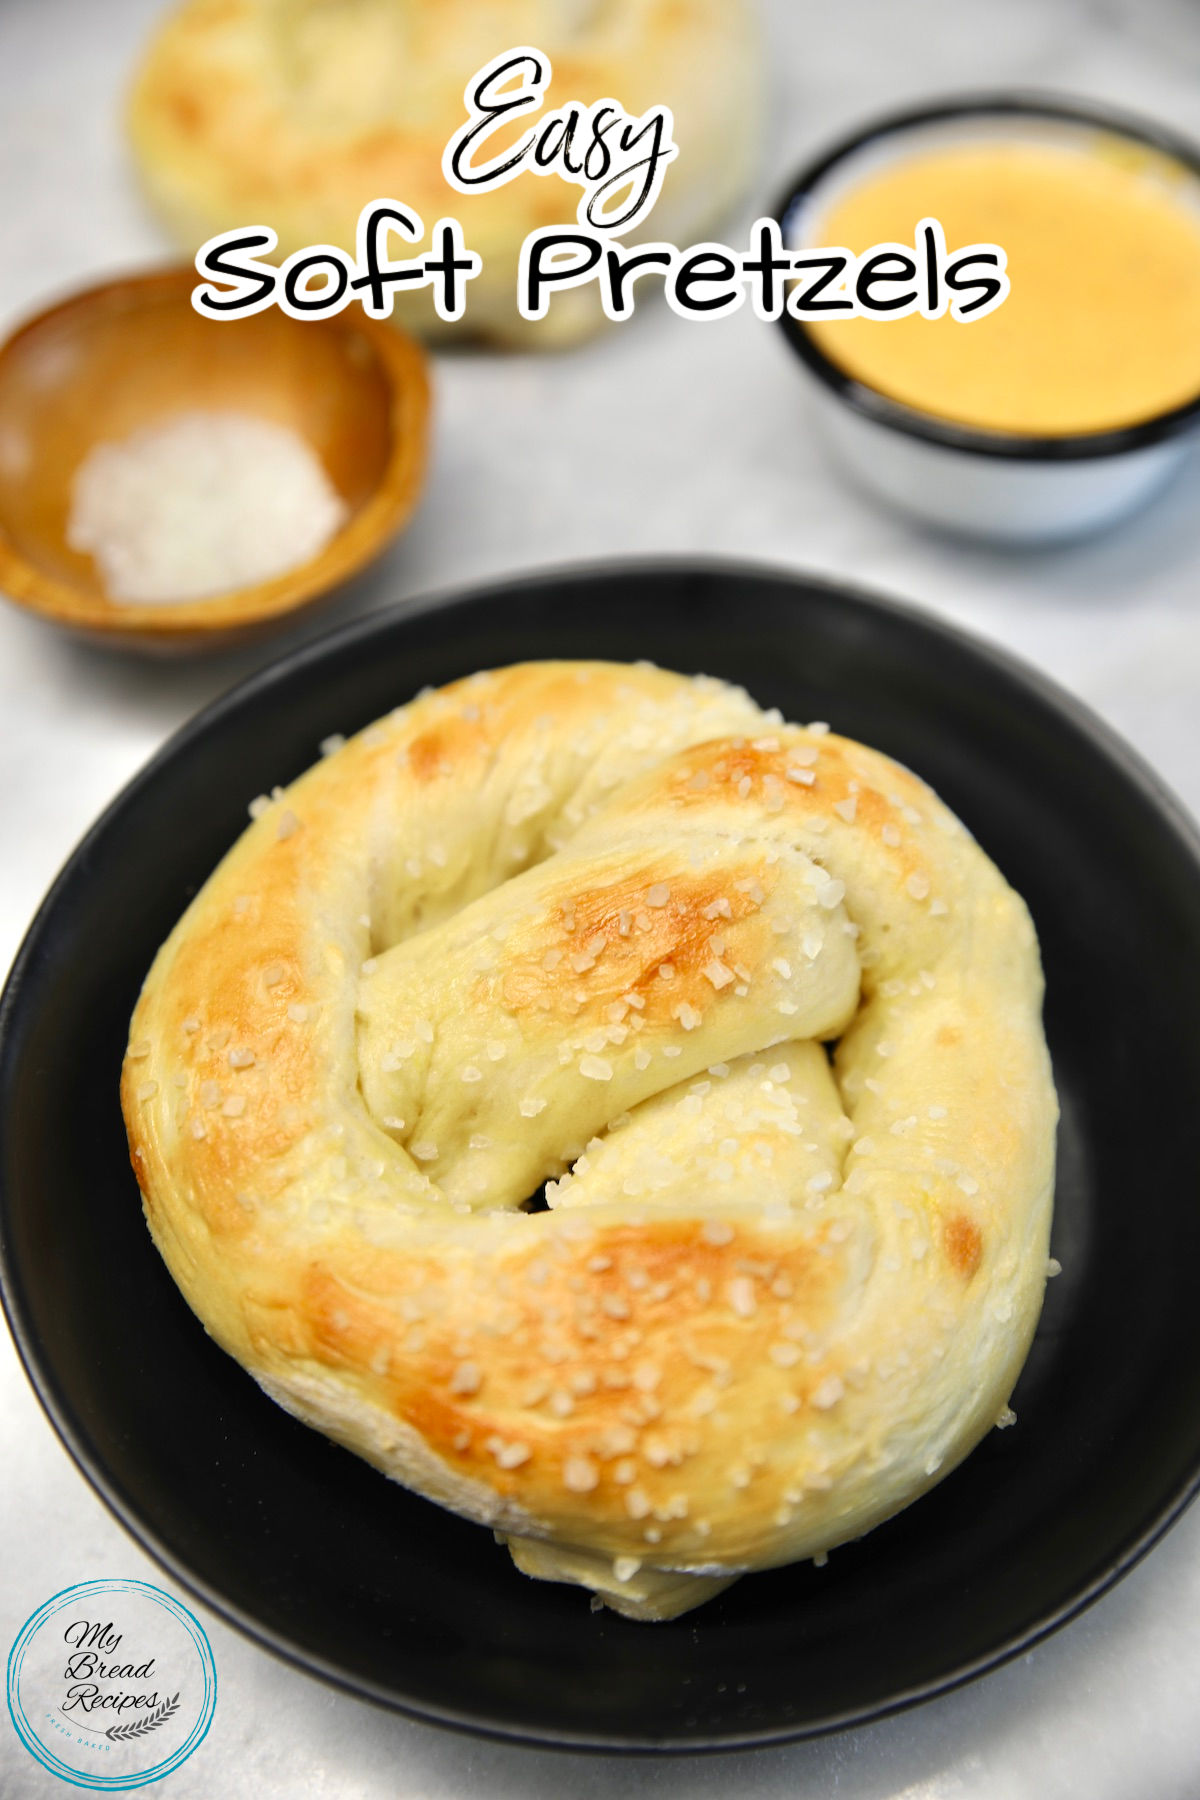 Soft pretzel on a plate, bowl of cheese, text overlay.